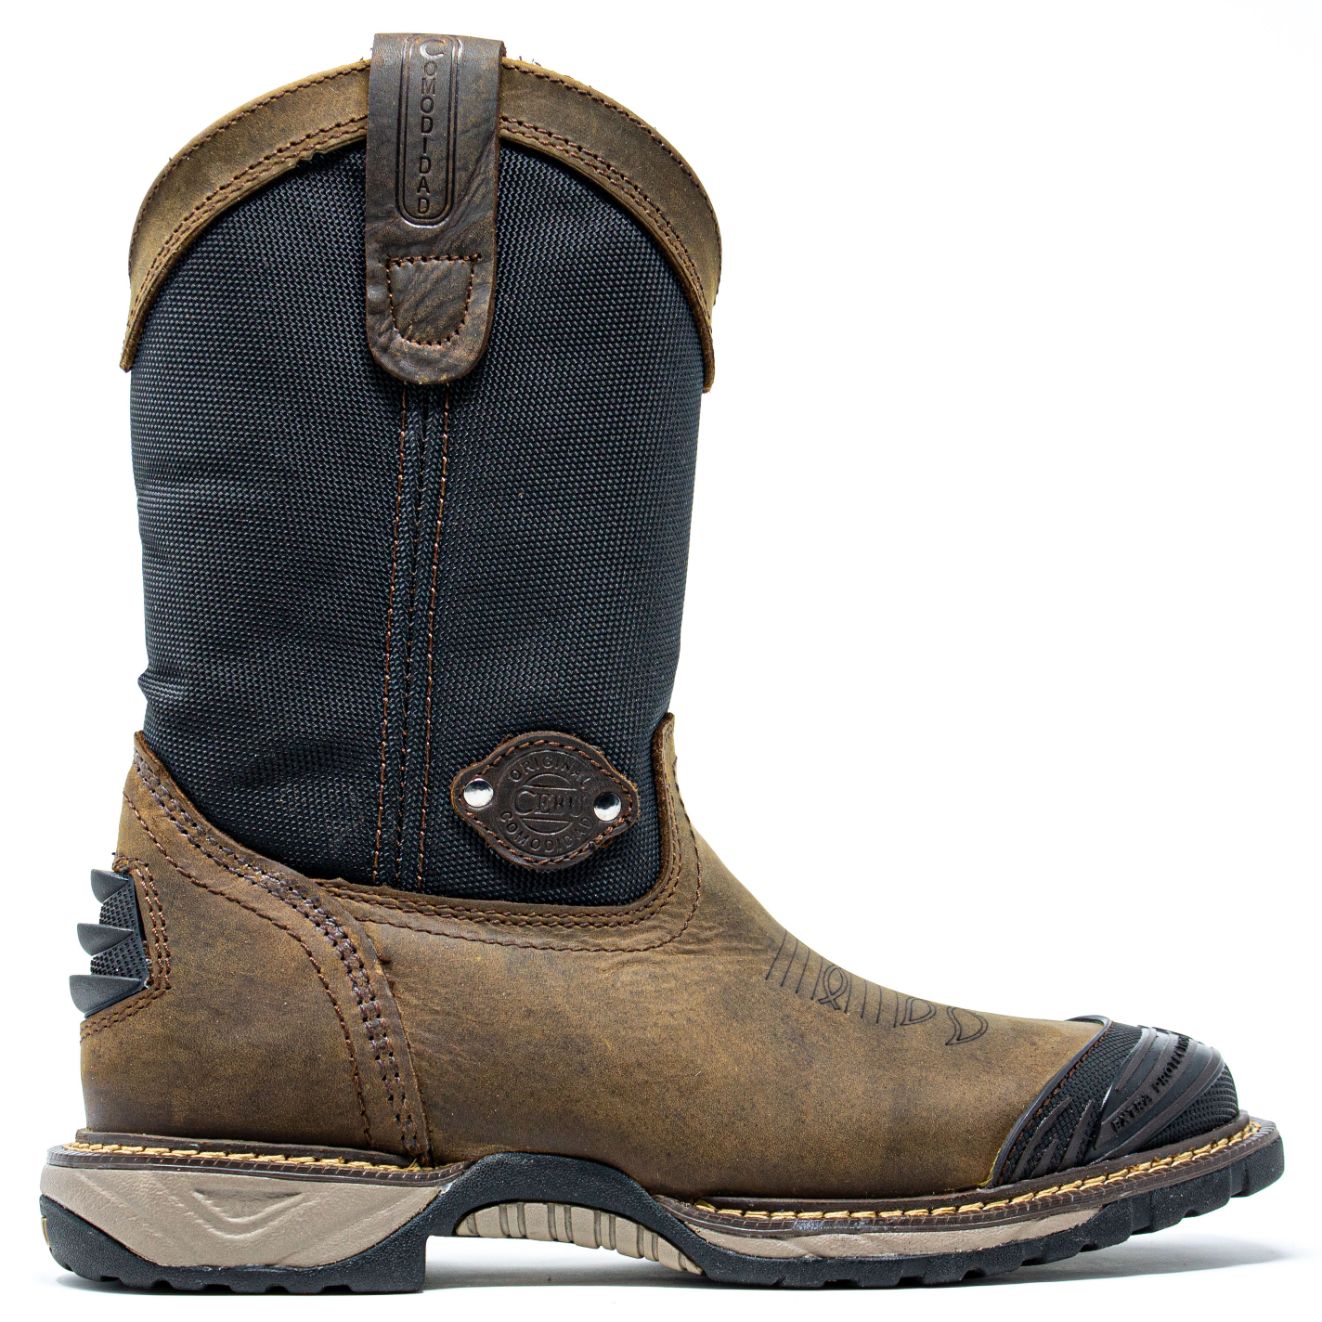 Men's Work Boots - Square Toe & Rubber Shield - Brown Work Boots - Cebu - Pull On Work Boots - Brown Wellington Work Boots